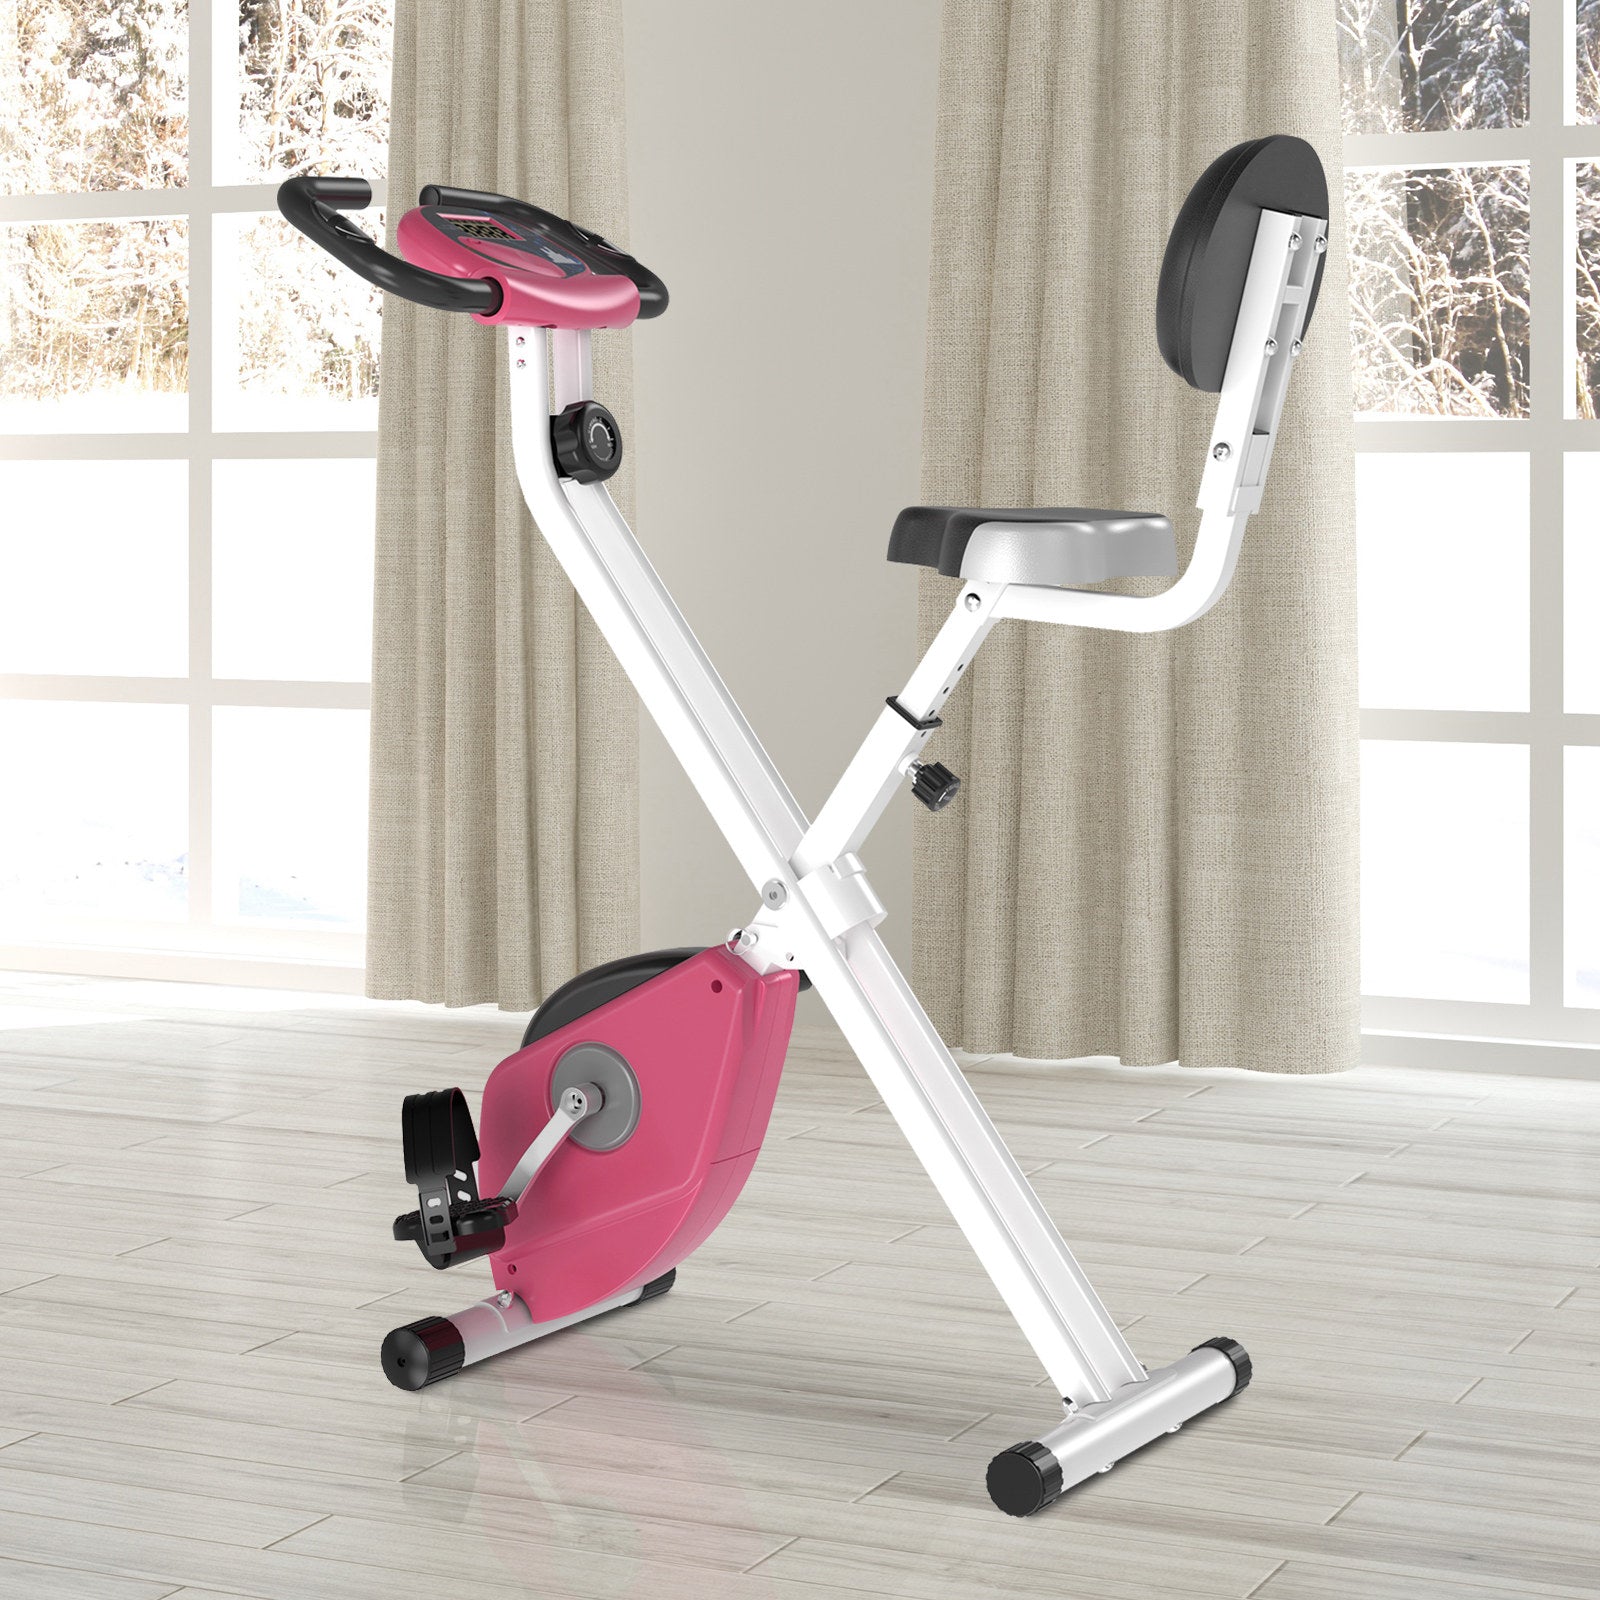 Manual Resistance Exercise Bike Foldable with LCD Monitor - Inspirely